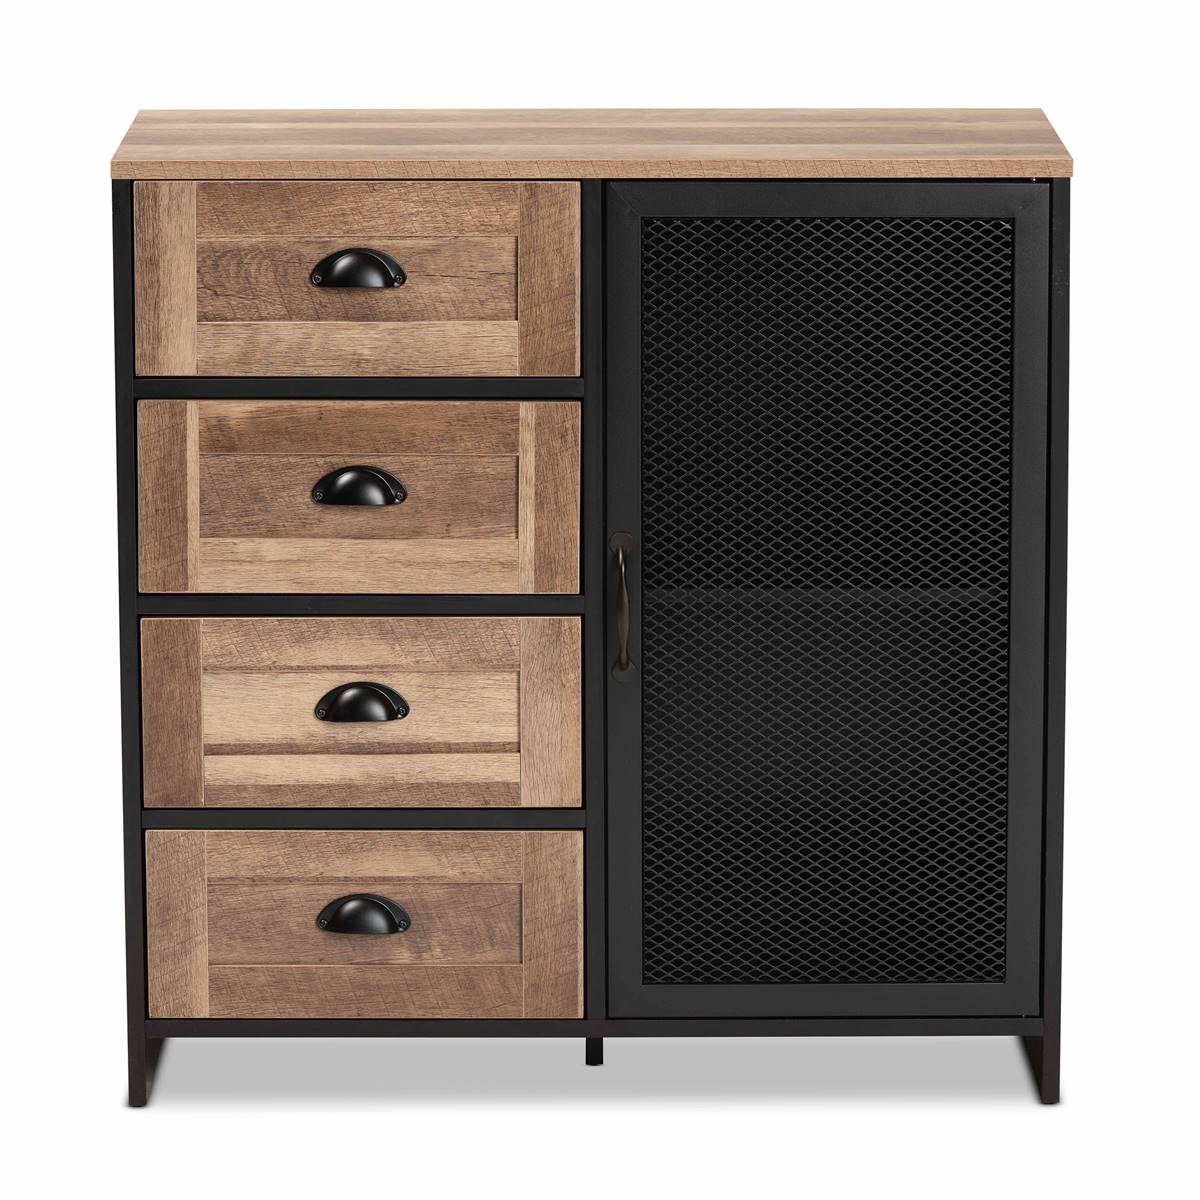 Baxton Studio Connell Brown & Black Wood Sideboard Buffet